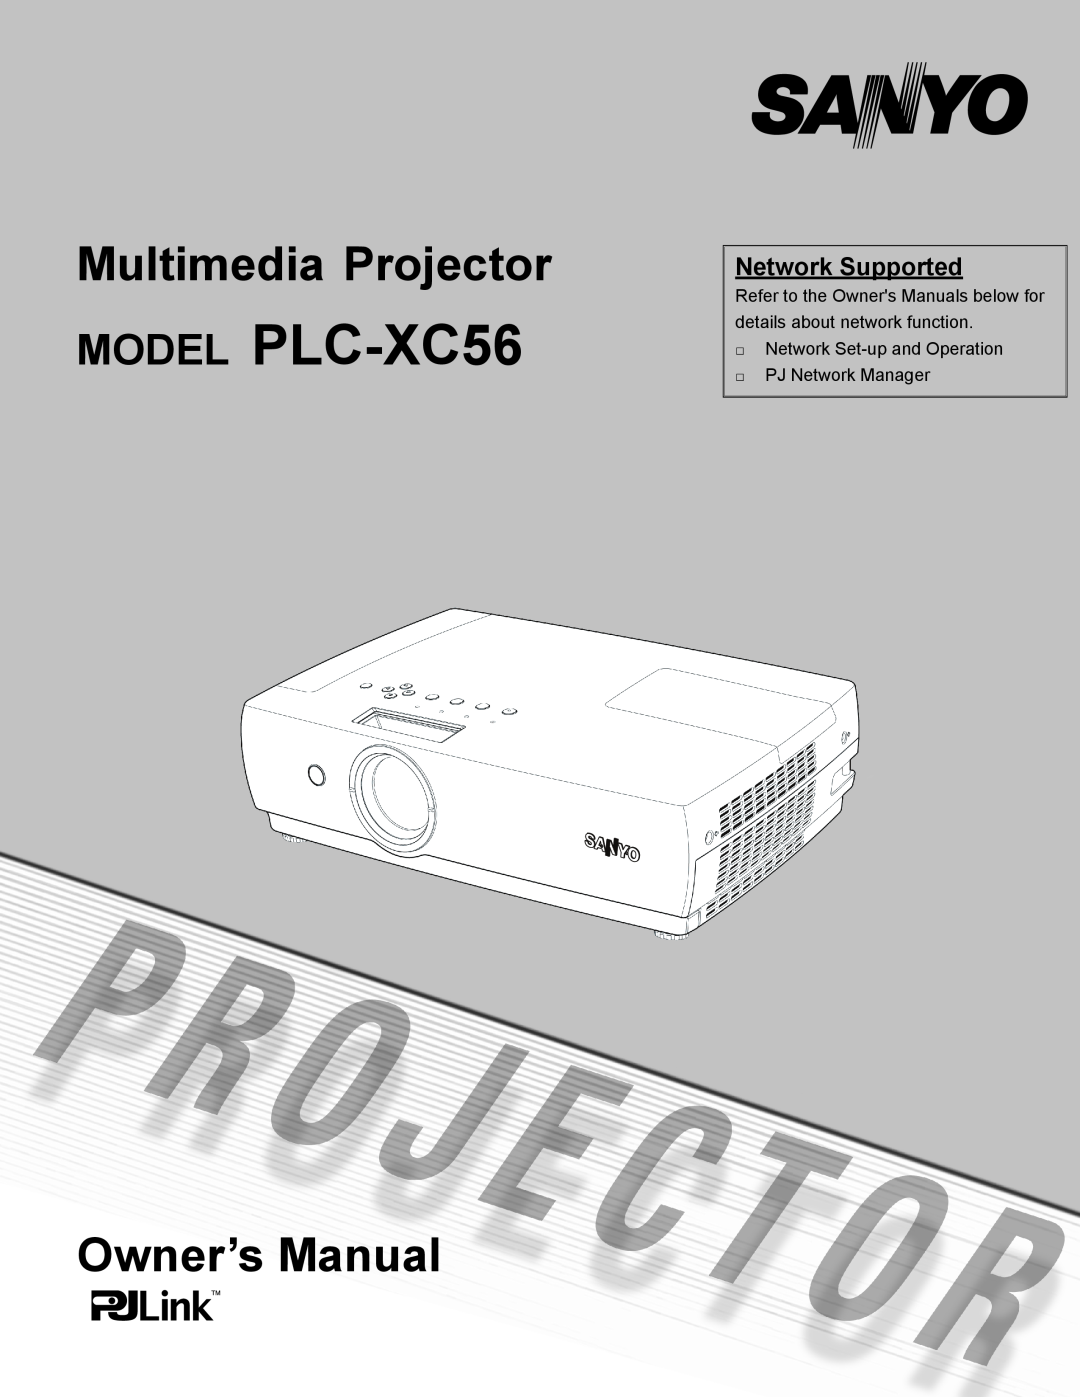 Sanyo owner manual Network Supported, MODEL PLC-XC56, Multimedia Projector, Owner’s Manual 